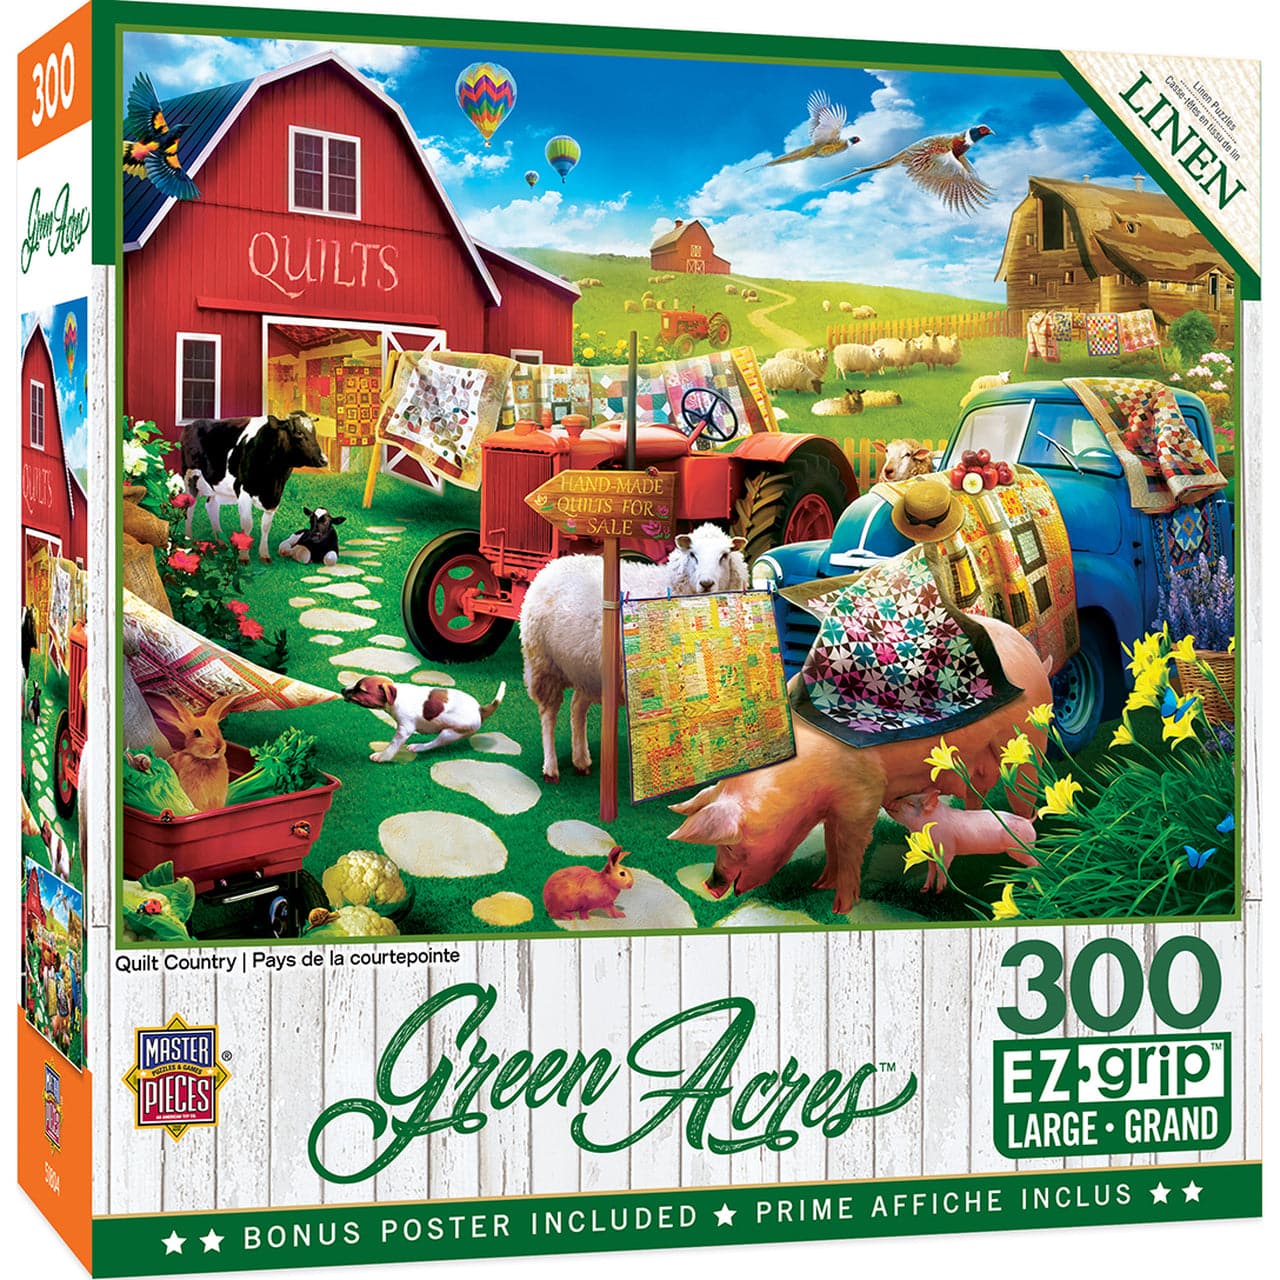 MasterPieces-Green Acres - Quilt Country - 300 Piece EzGrip Puzzle-32106-Legacy Toys